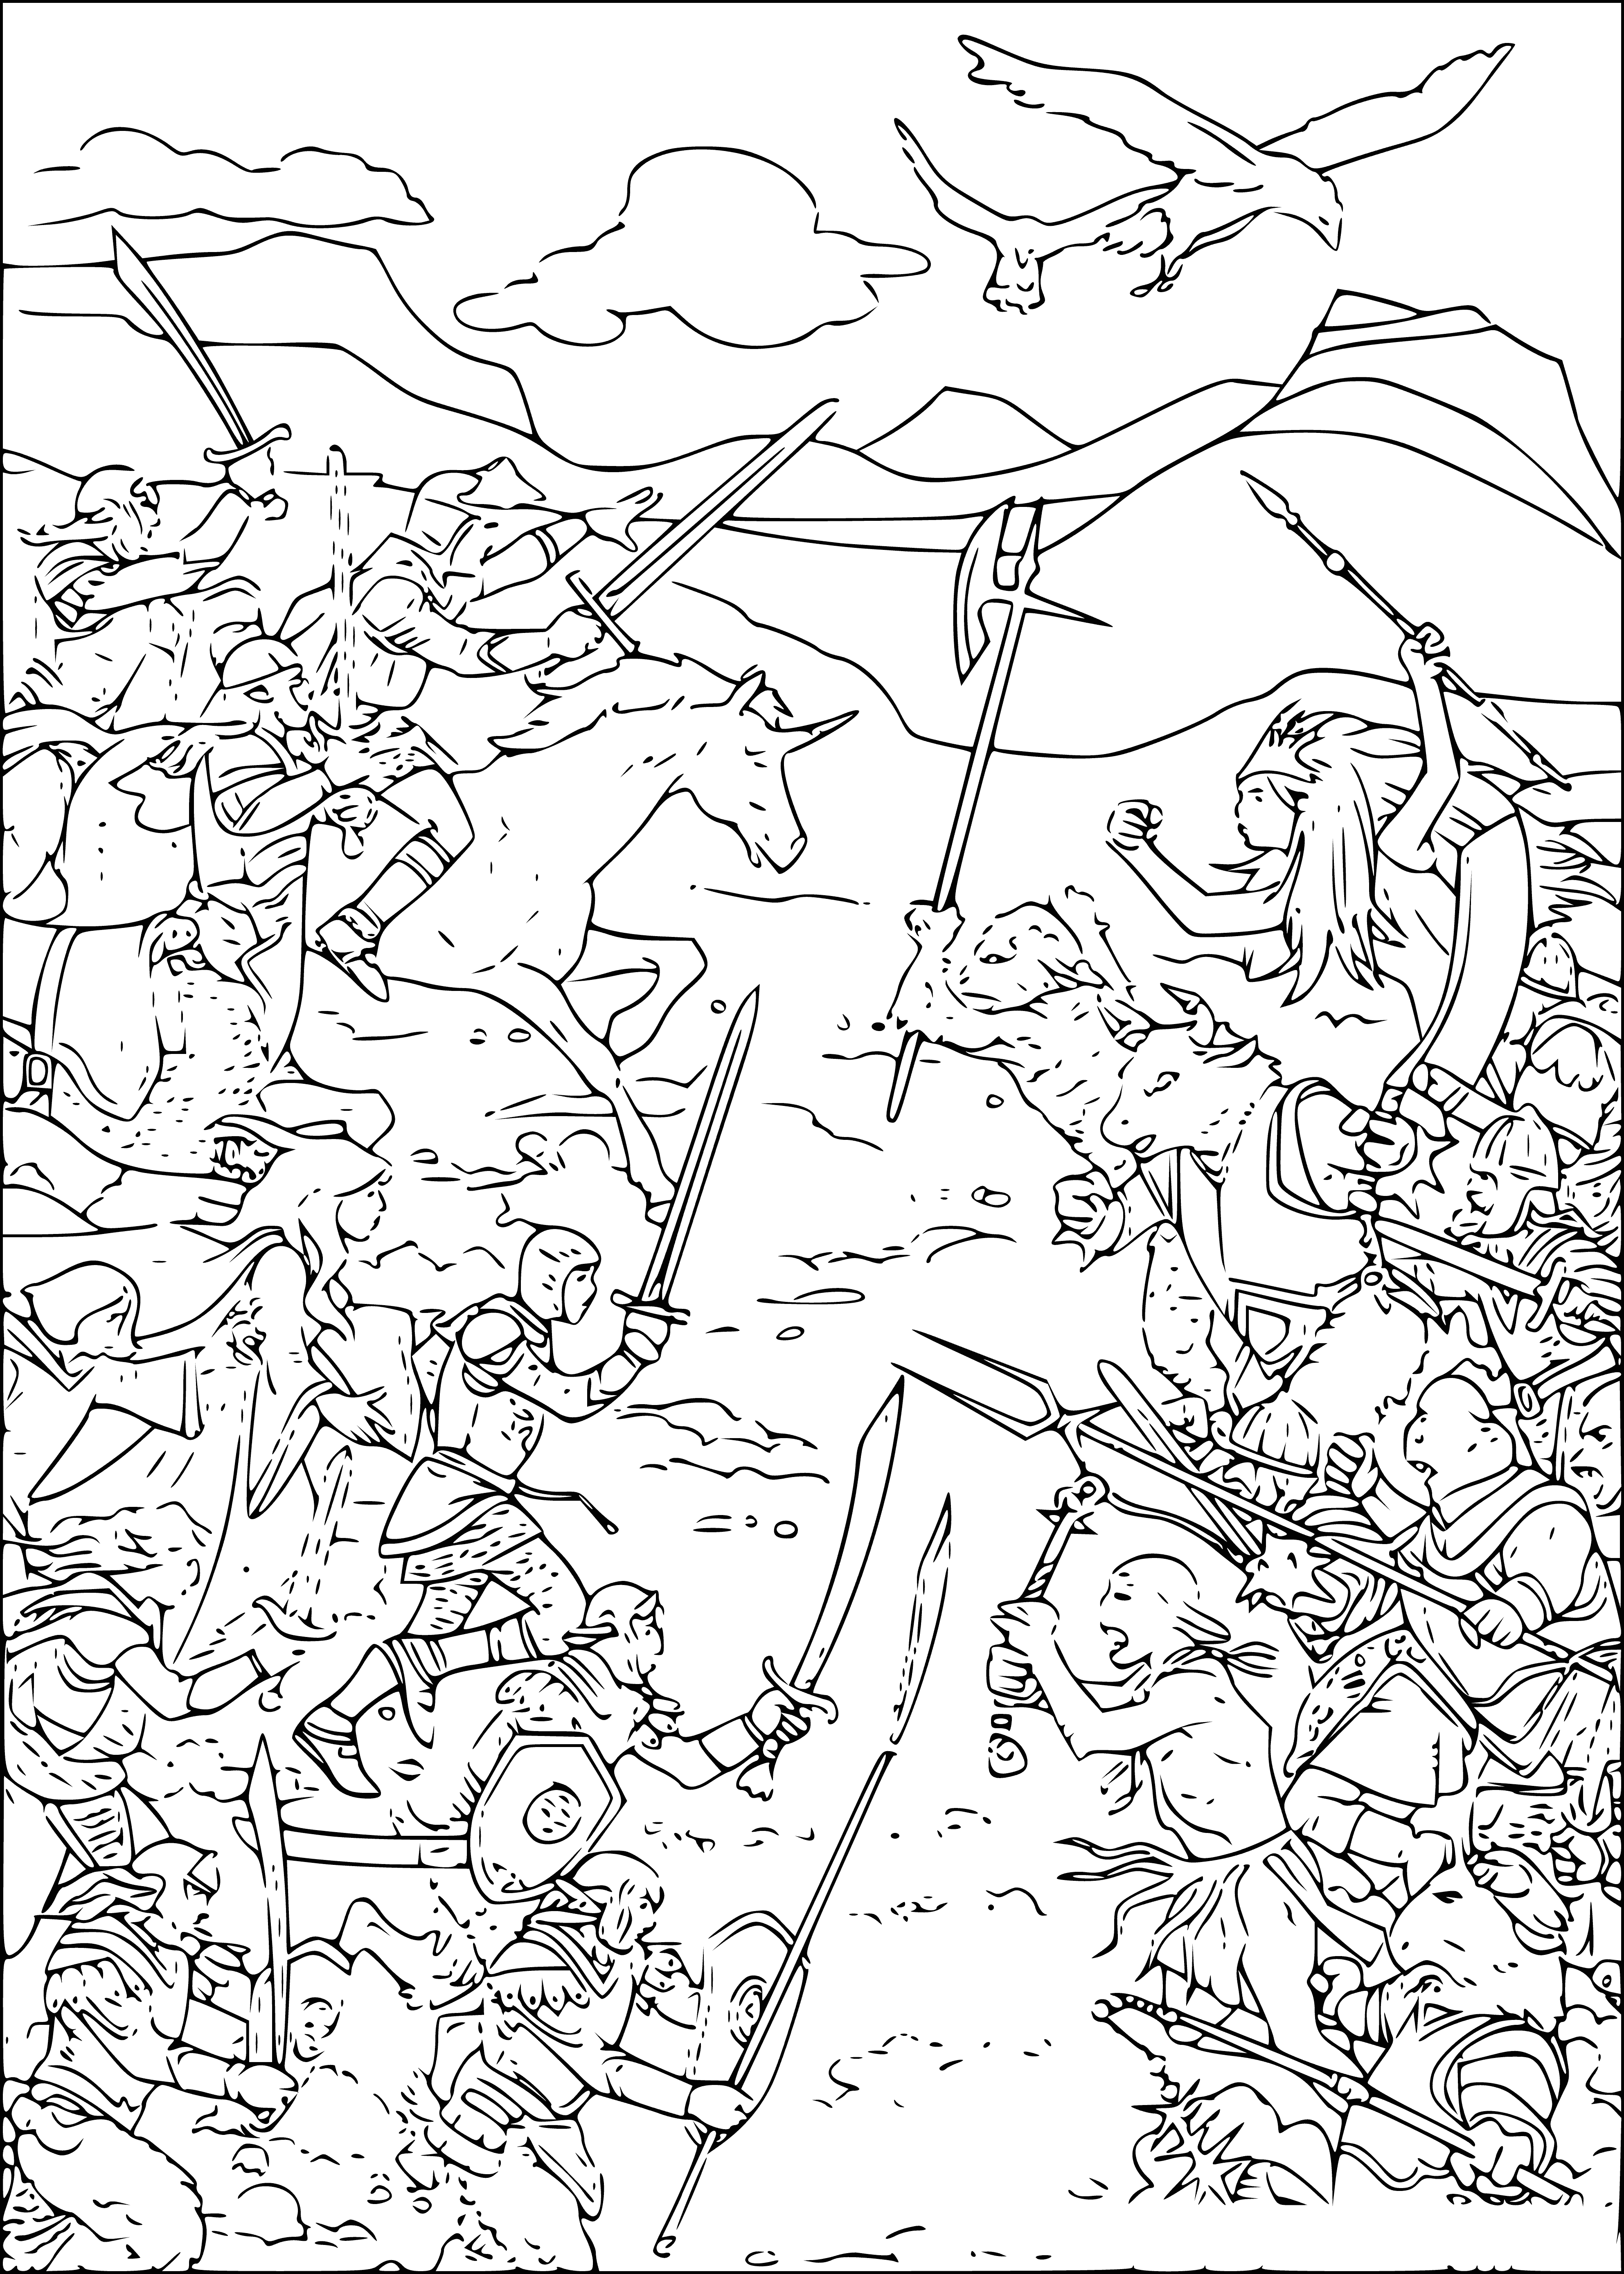 Bataille coloriage